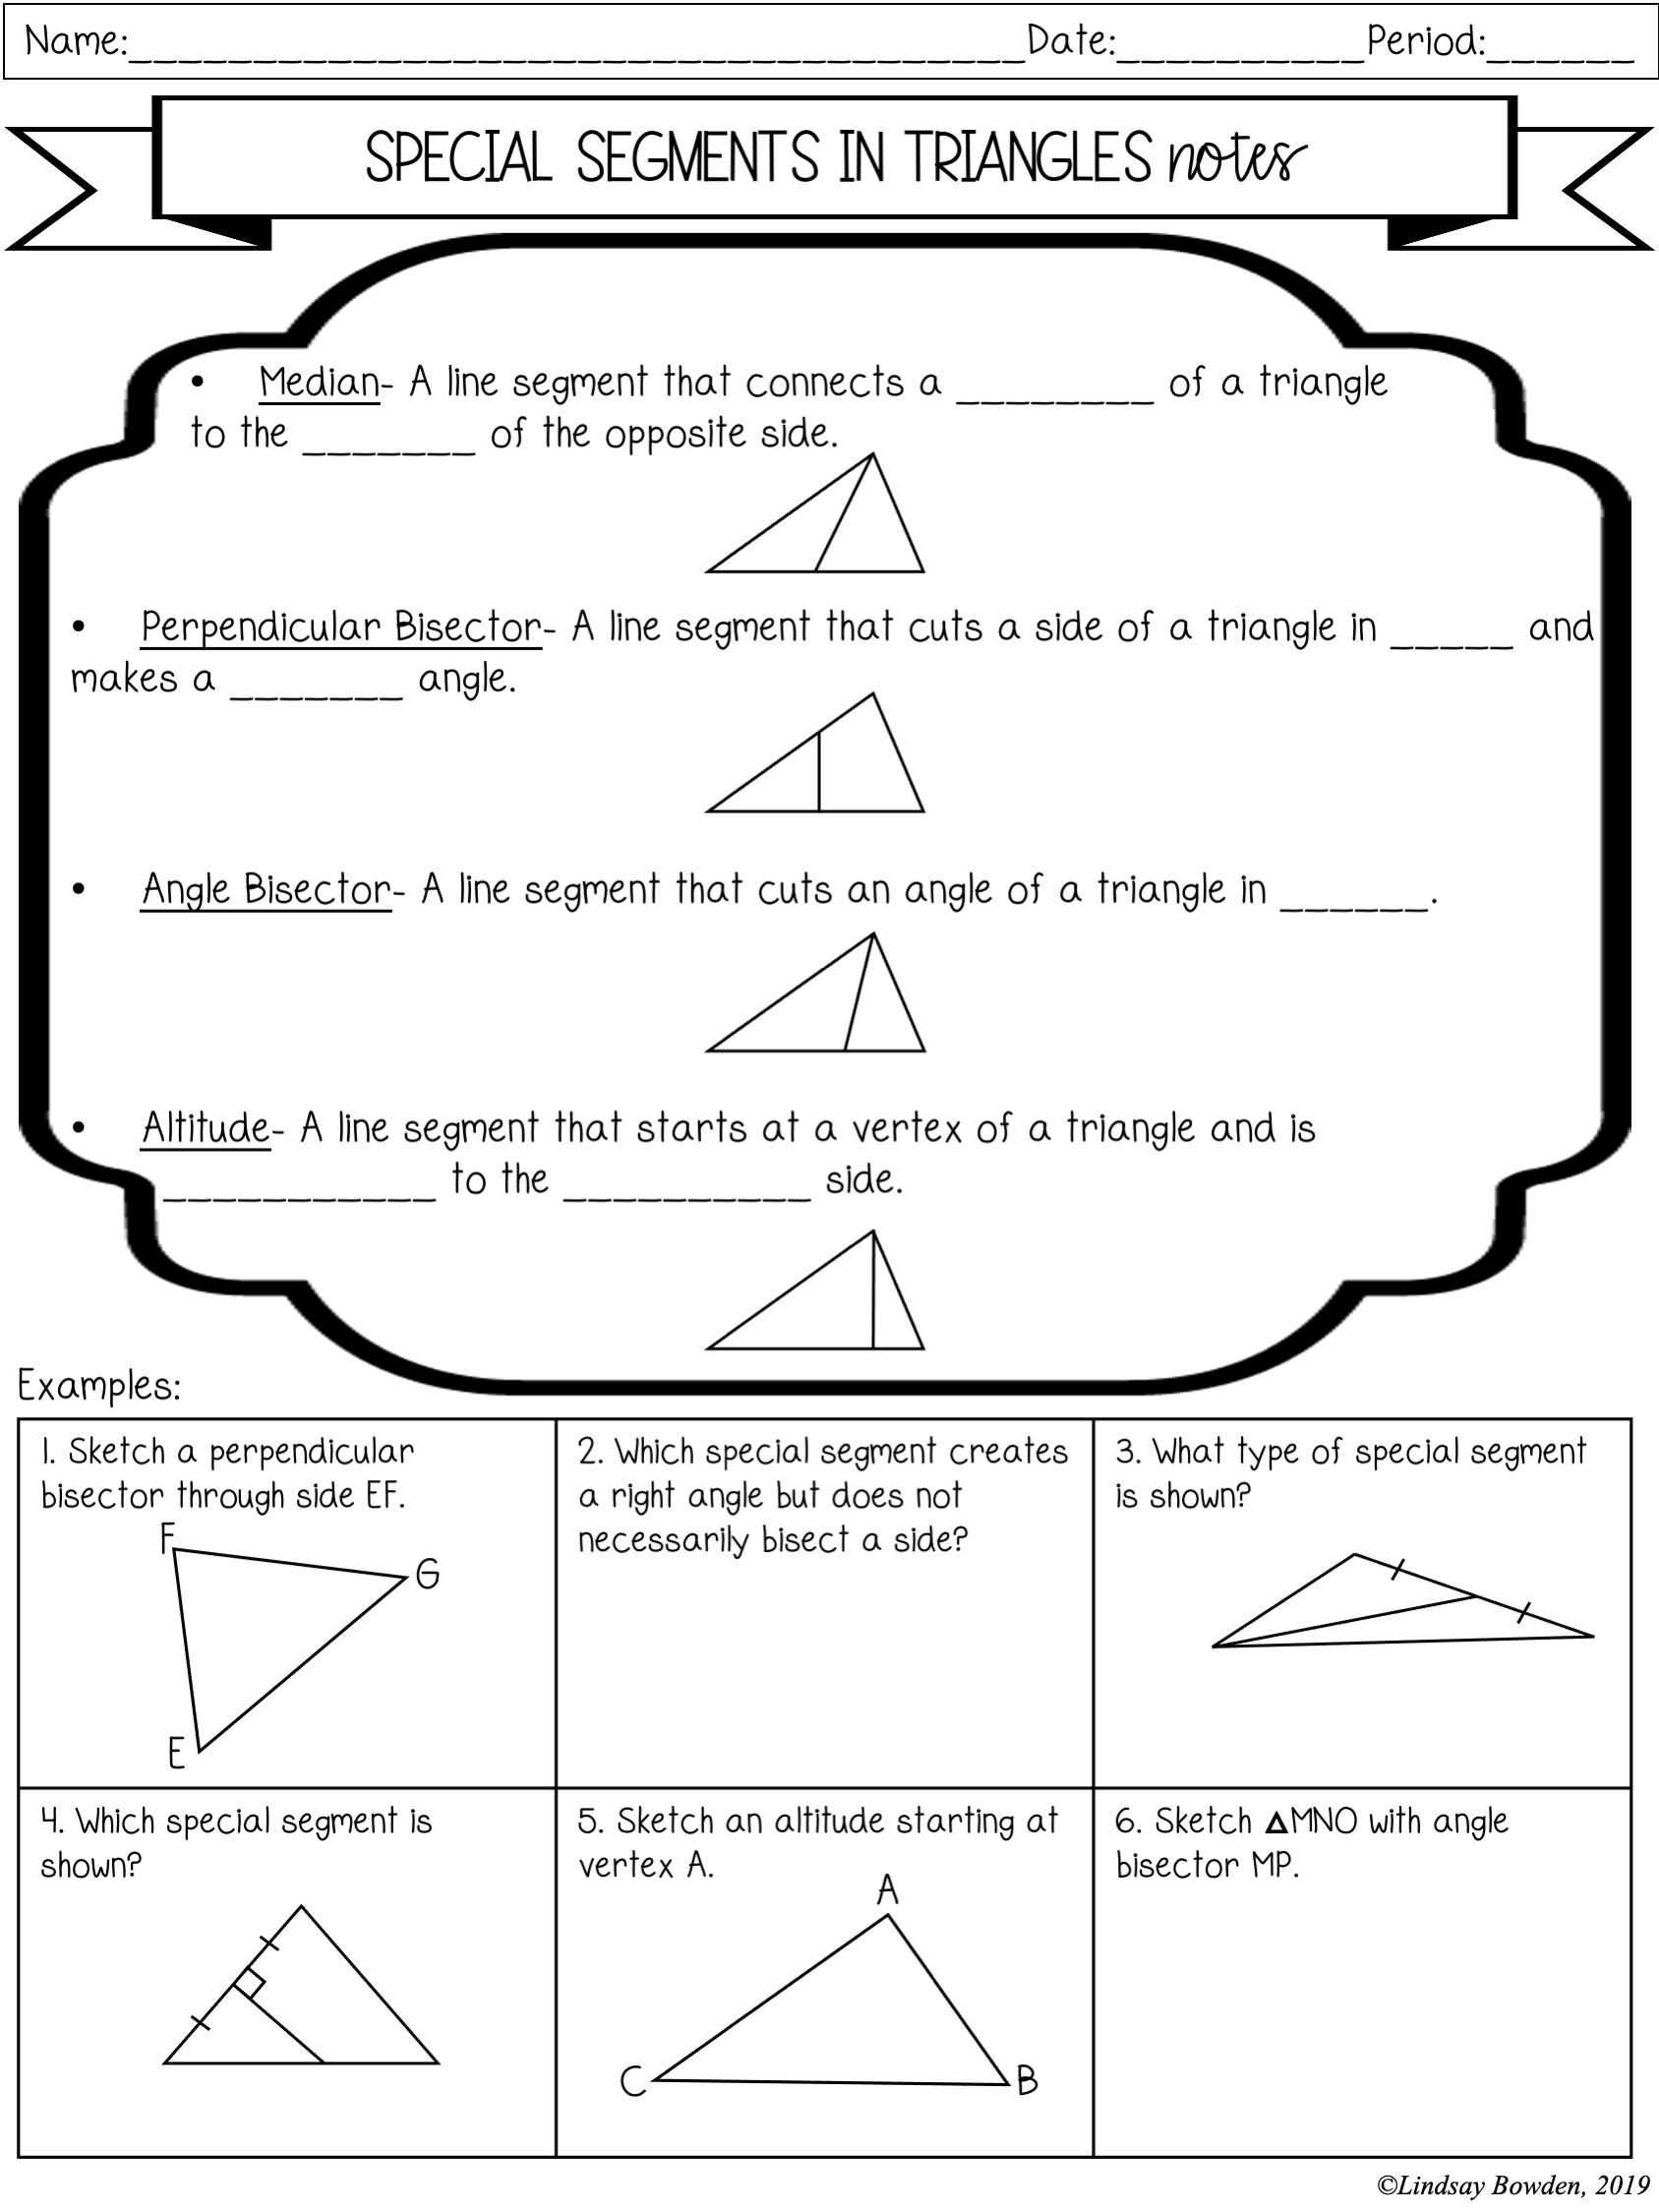 Triangle Centers Notes and Worksheets - Lindsay Bowden Pertaining To Centers Of Triangles Worksheet